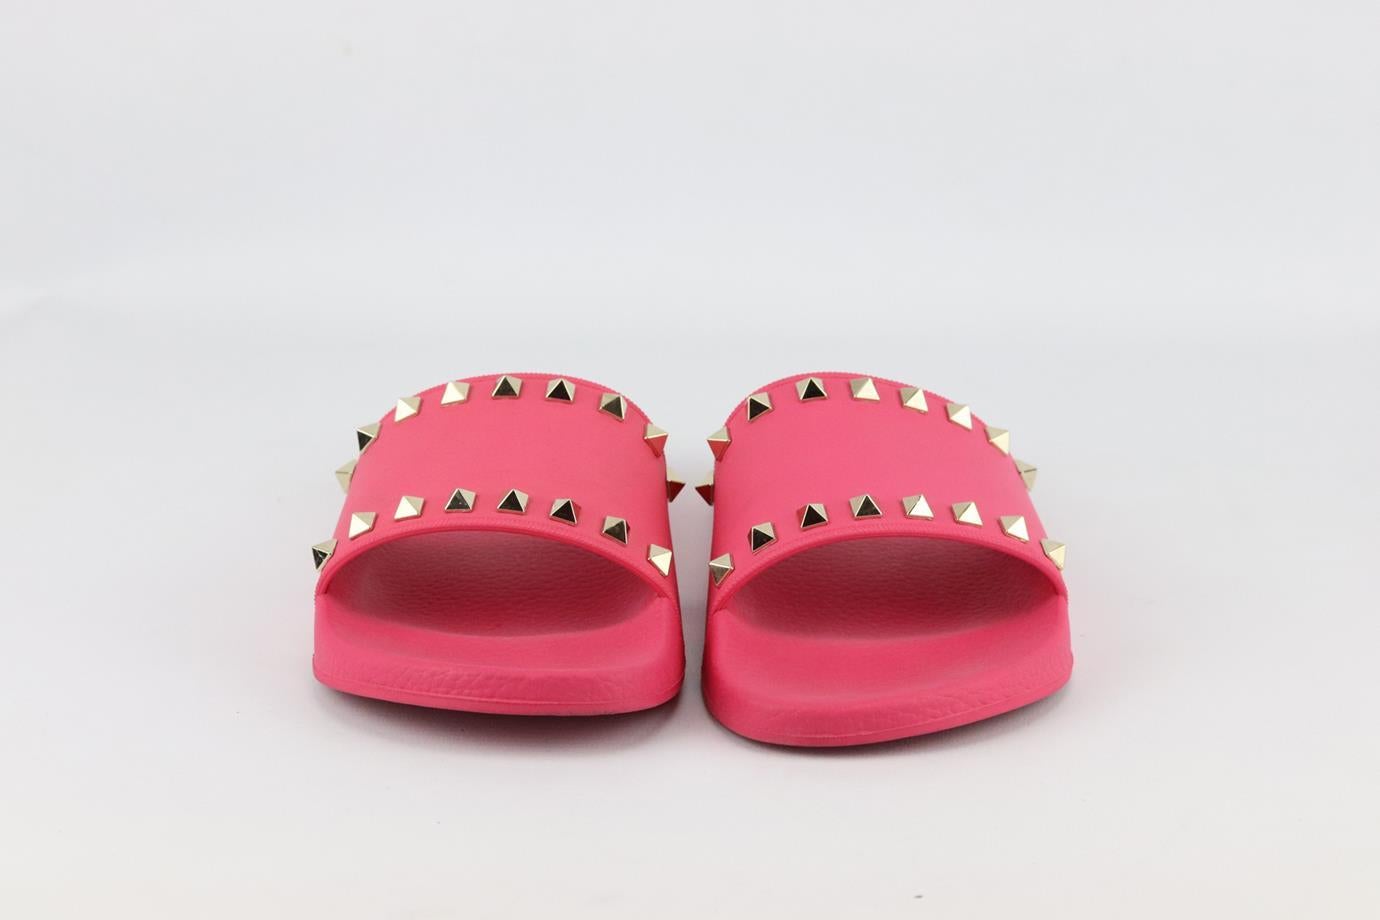 Valentino Garavani The Rockstud rubber slides. Pink. Slip on. Does not come with box or dustbag. Size: EU 39 (UK 6, US 9). Insole: 10 in. Heel: 1 in. Very good condition - Worn once. Light wear to soles; see pictures.
